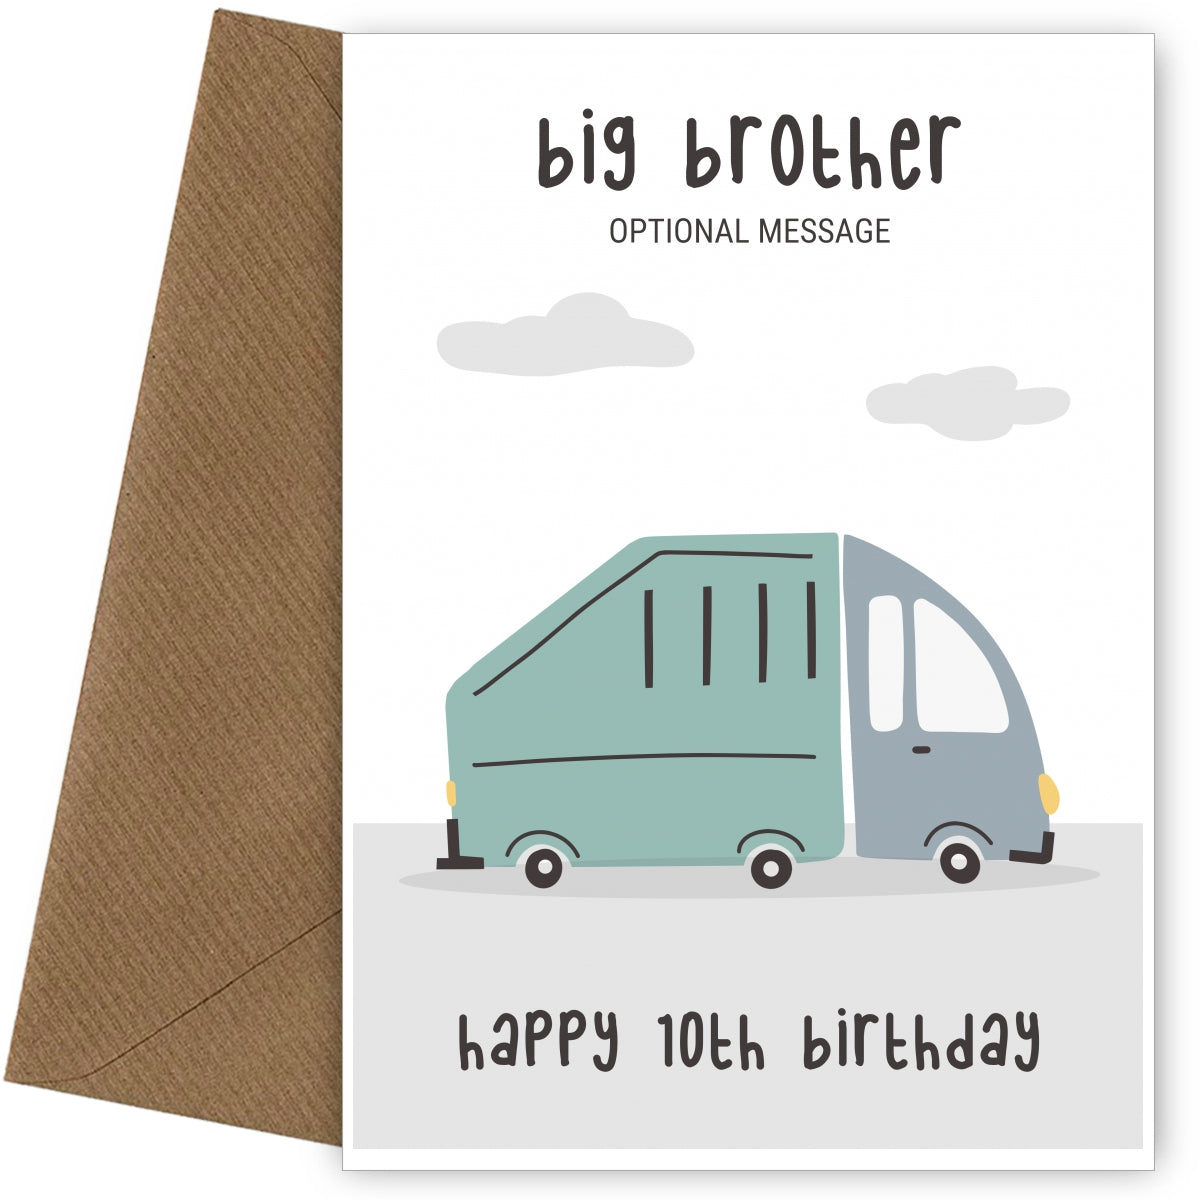 Fun Vehicles 10th Birthday Card for Big Brother - Garbage Truck